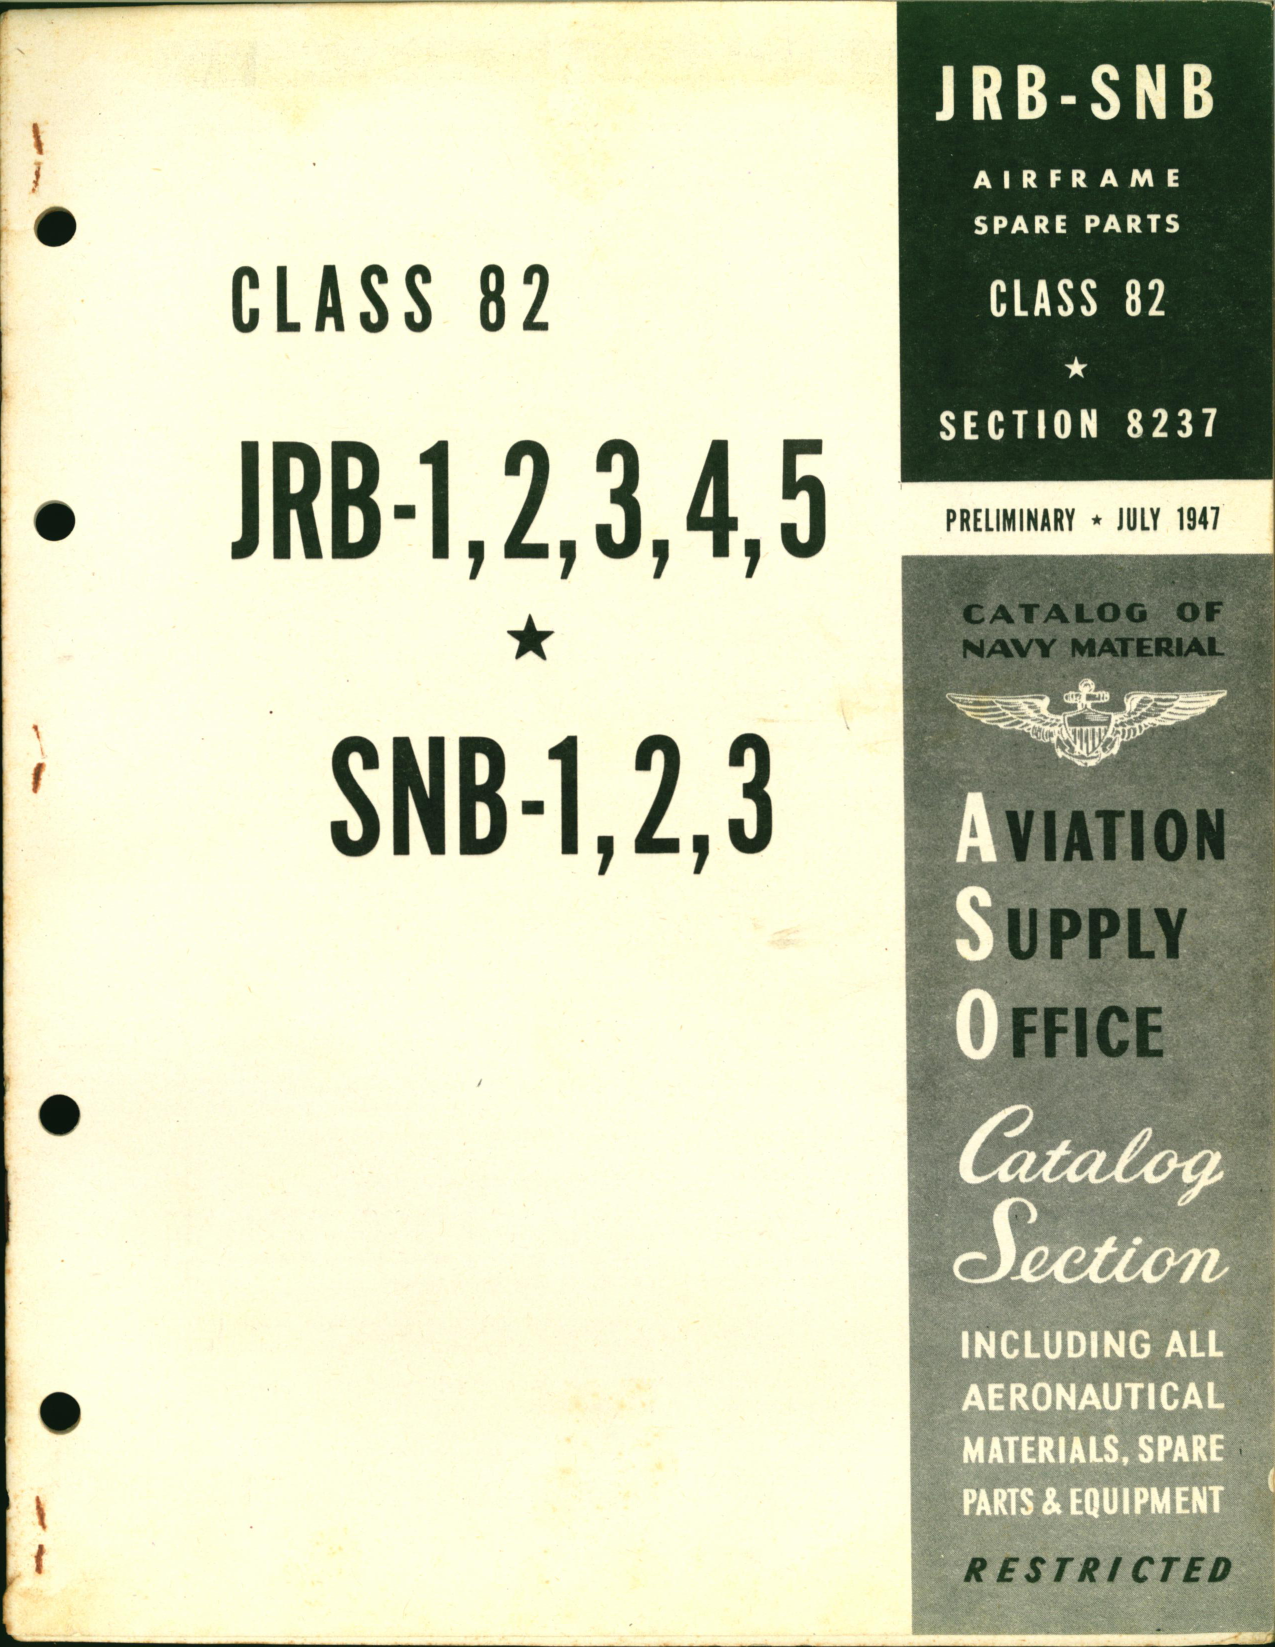 Sample page 1 from AirCorps Library document: JRB-SNB Airframe Spare Parts